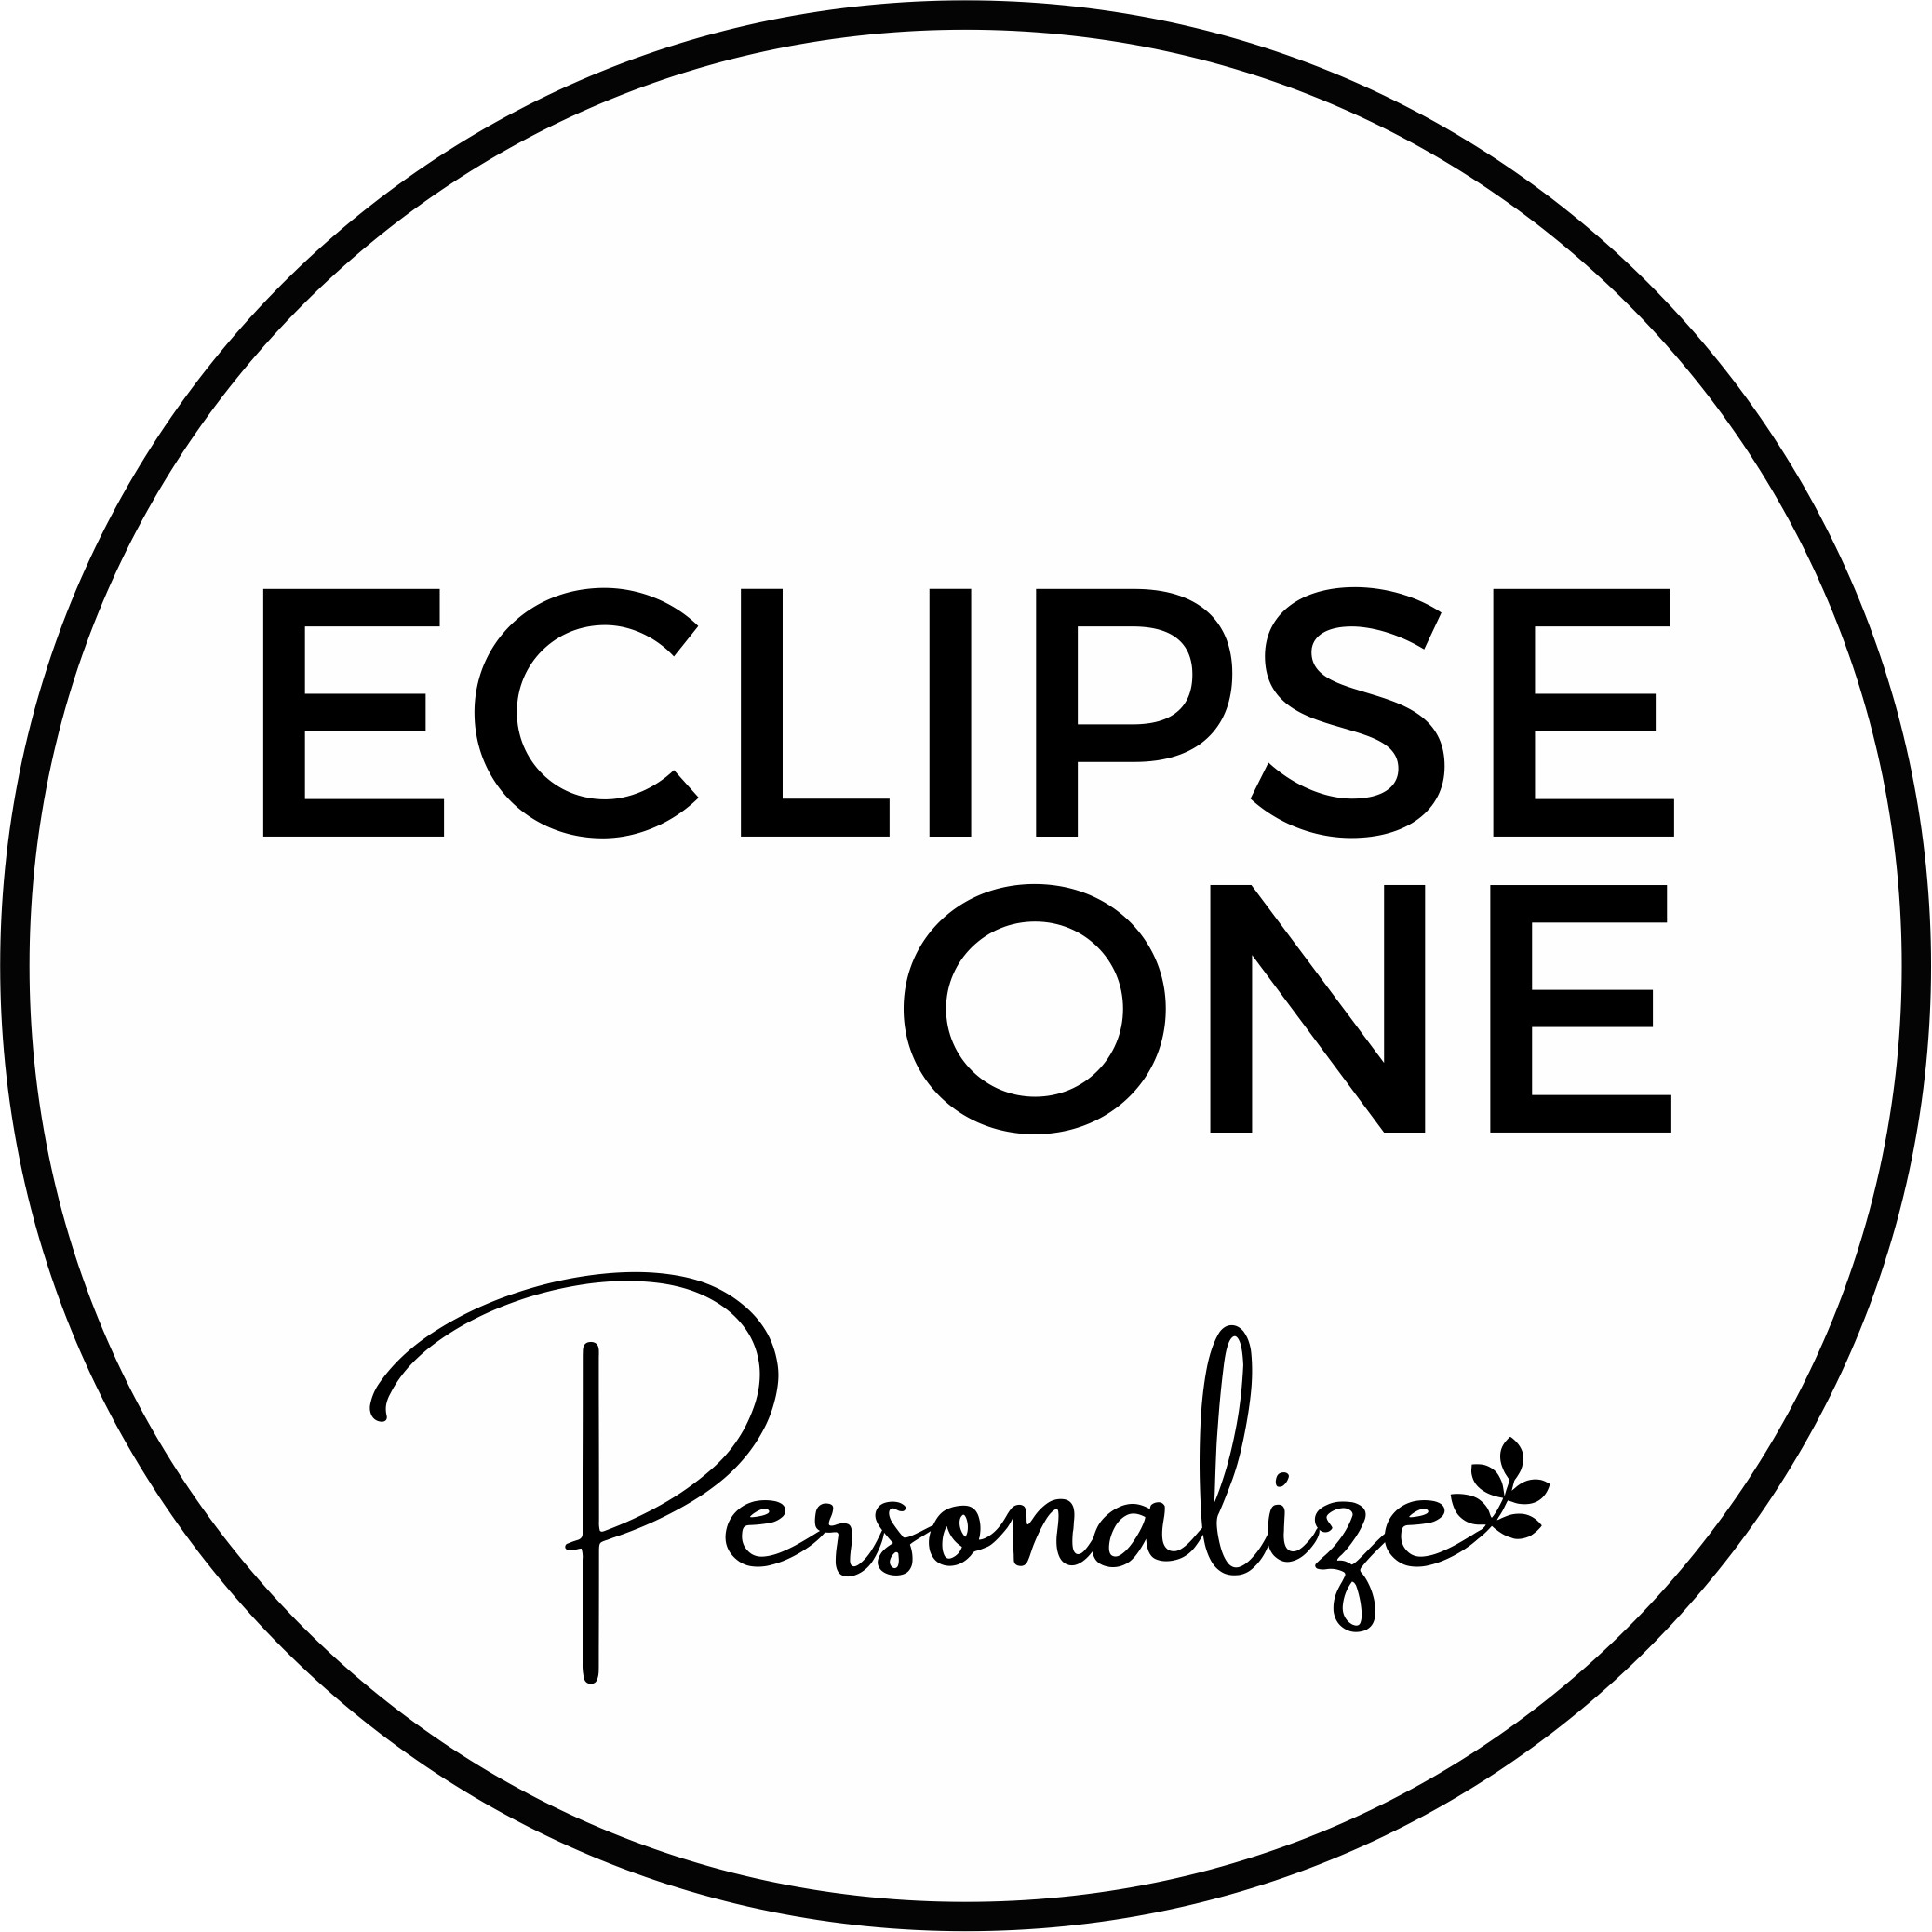 ECLIPSE ONE PERSONALIZE